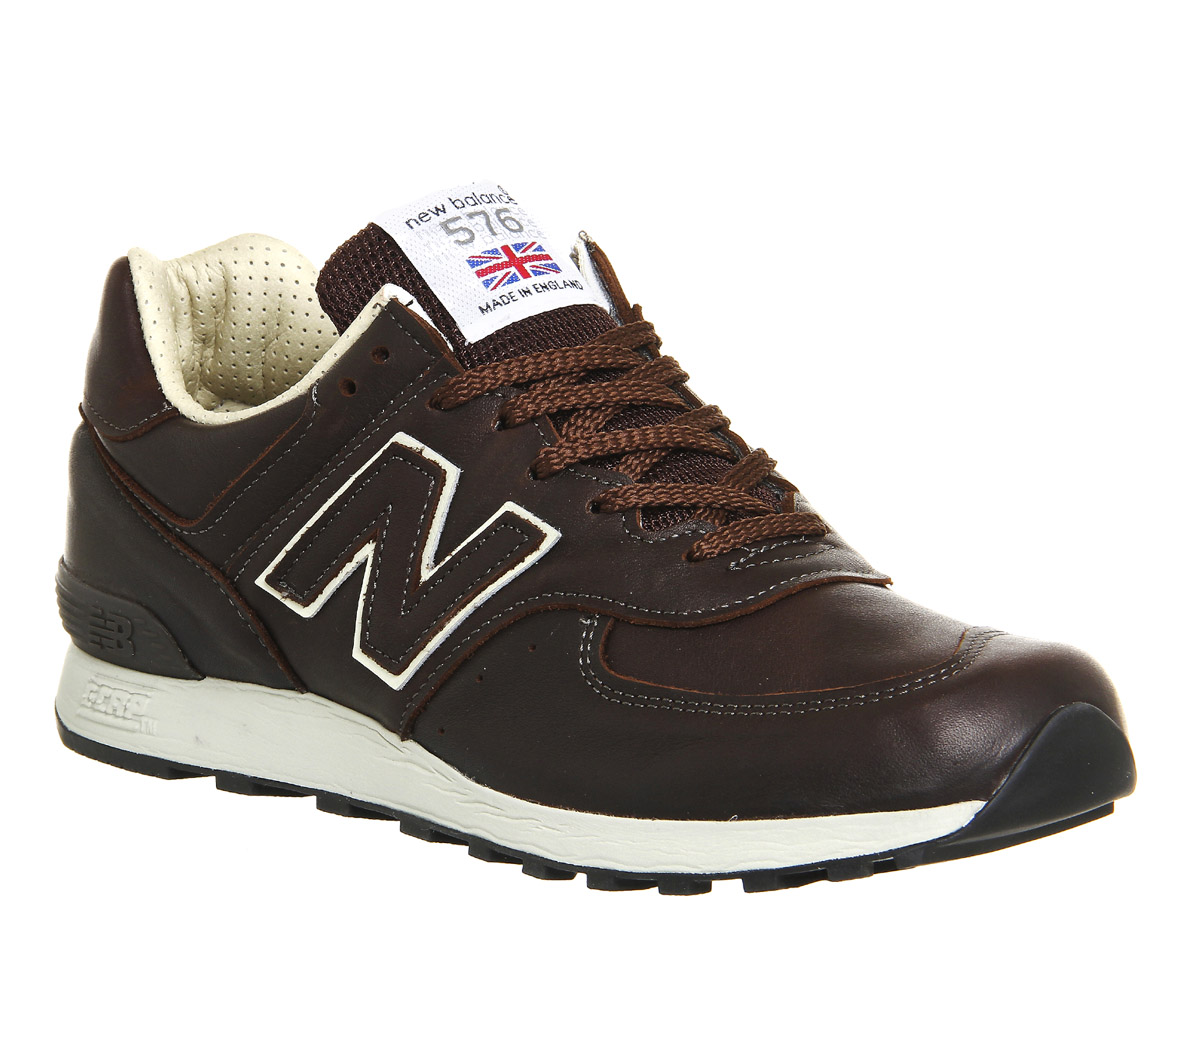 new balance 576 made in england leather